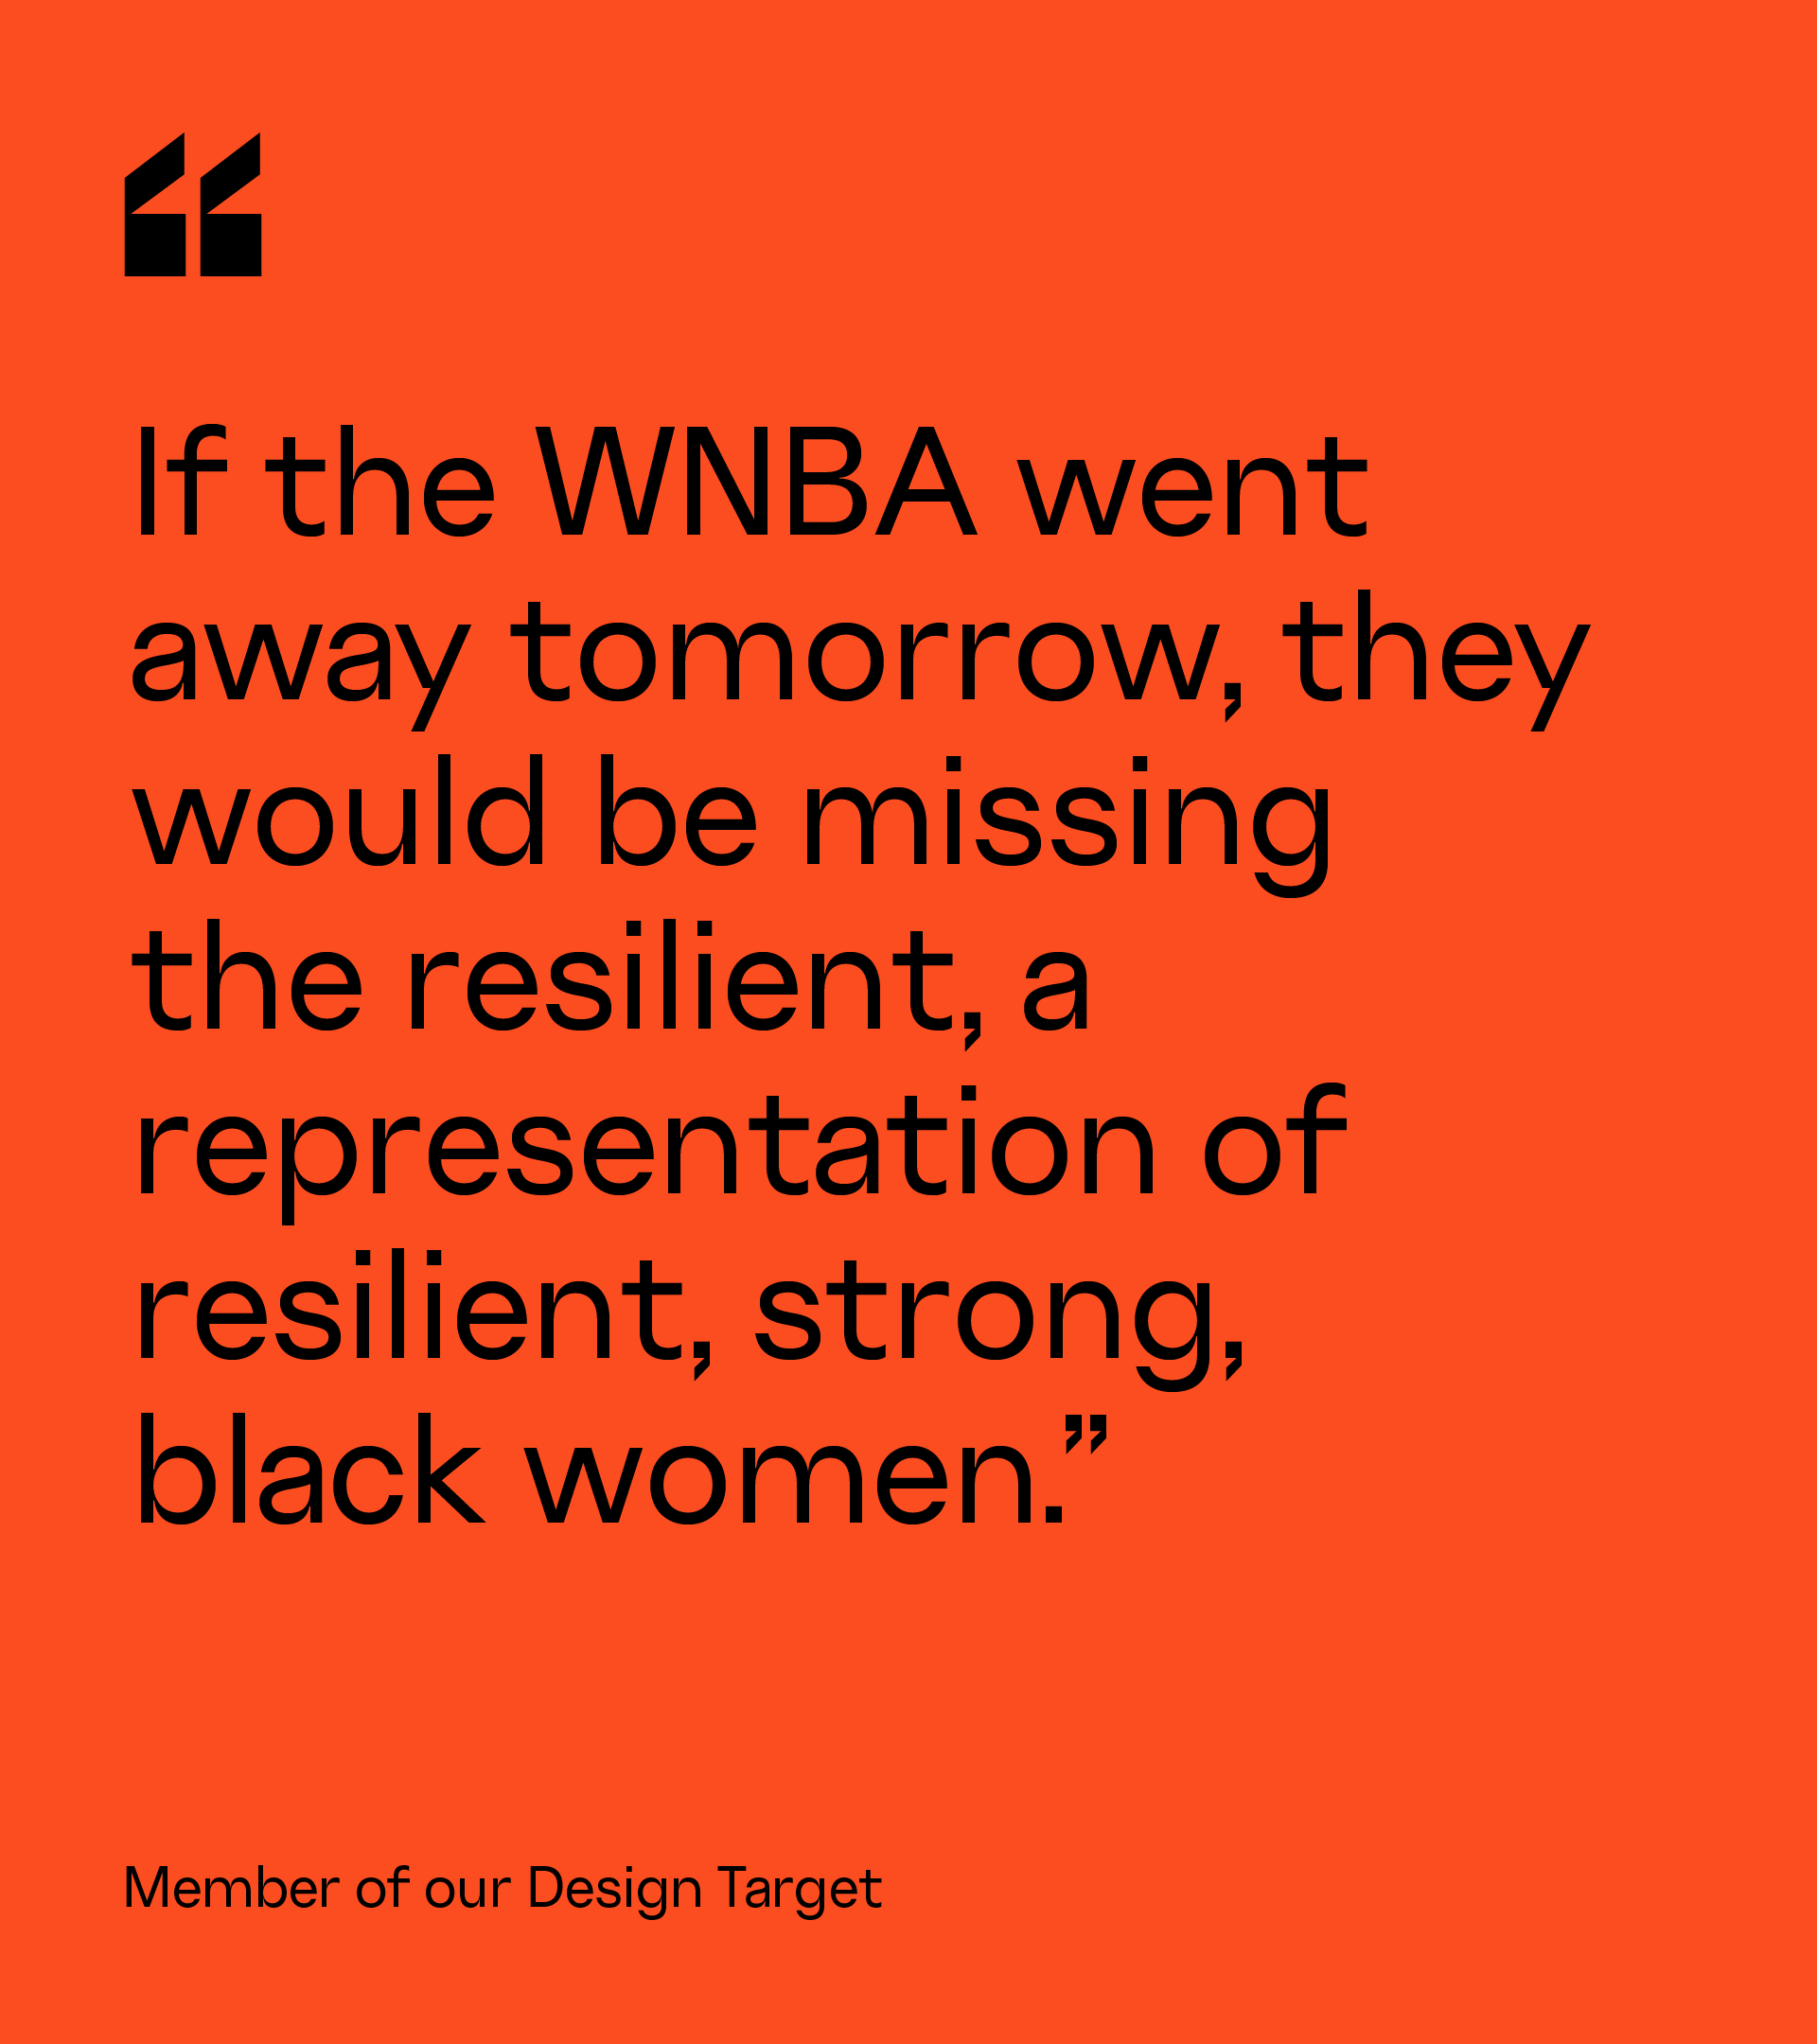 Large quote: “If the WNBA went away tomorrow…”